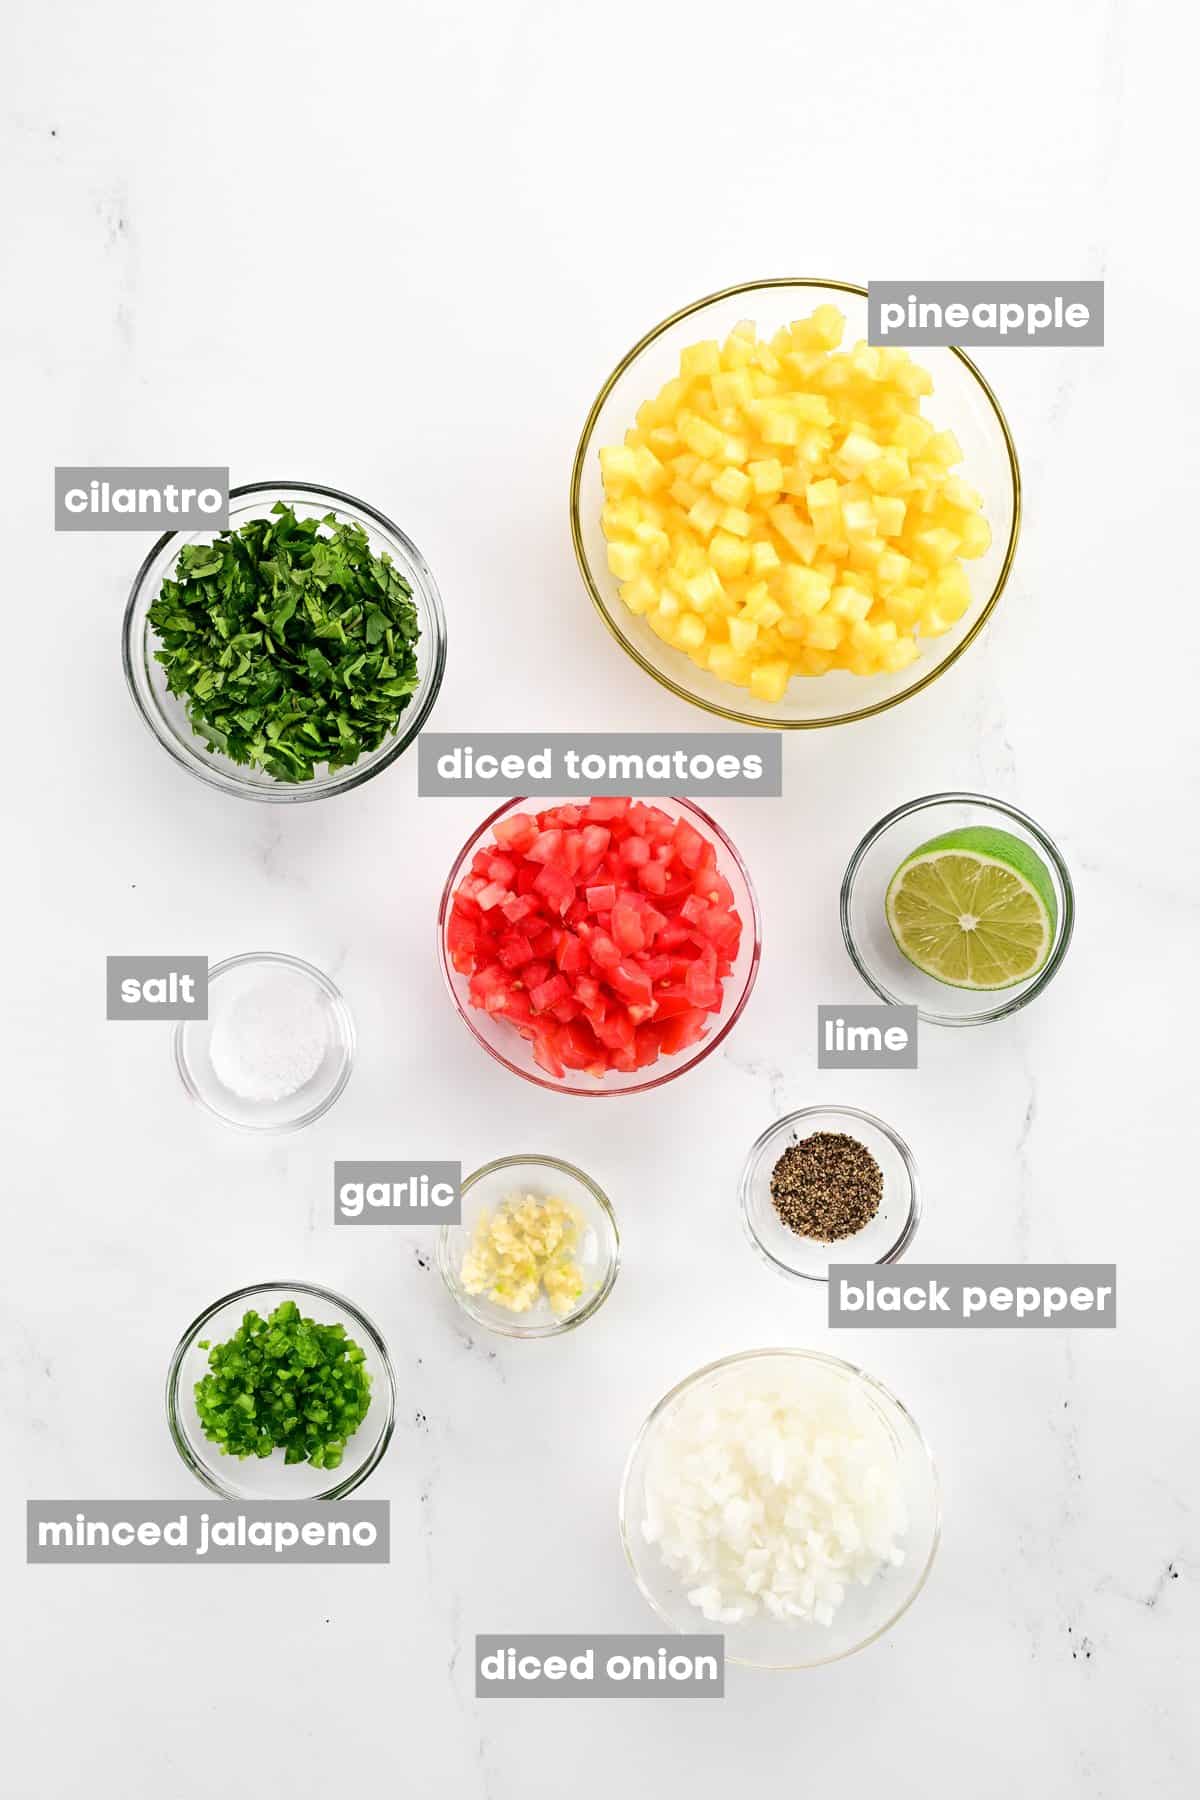 Labeled ingredients in bowls.